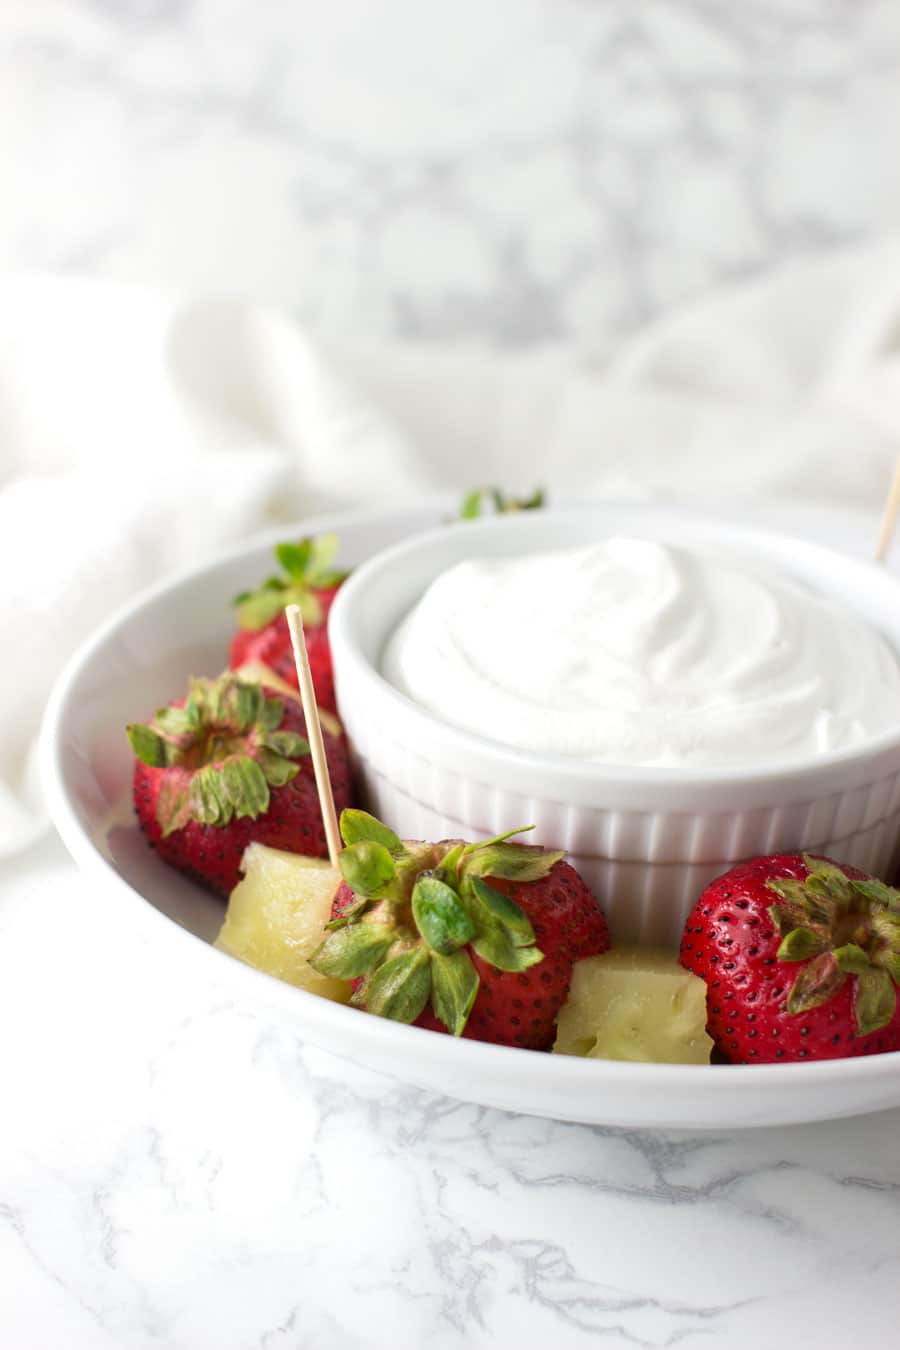 A ramekin of Coconut Whipped Cream surrounded by slices of strawberries and pineapple from acleanplate.com